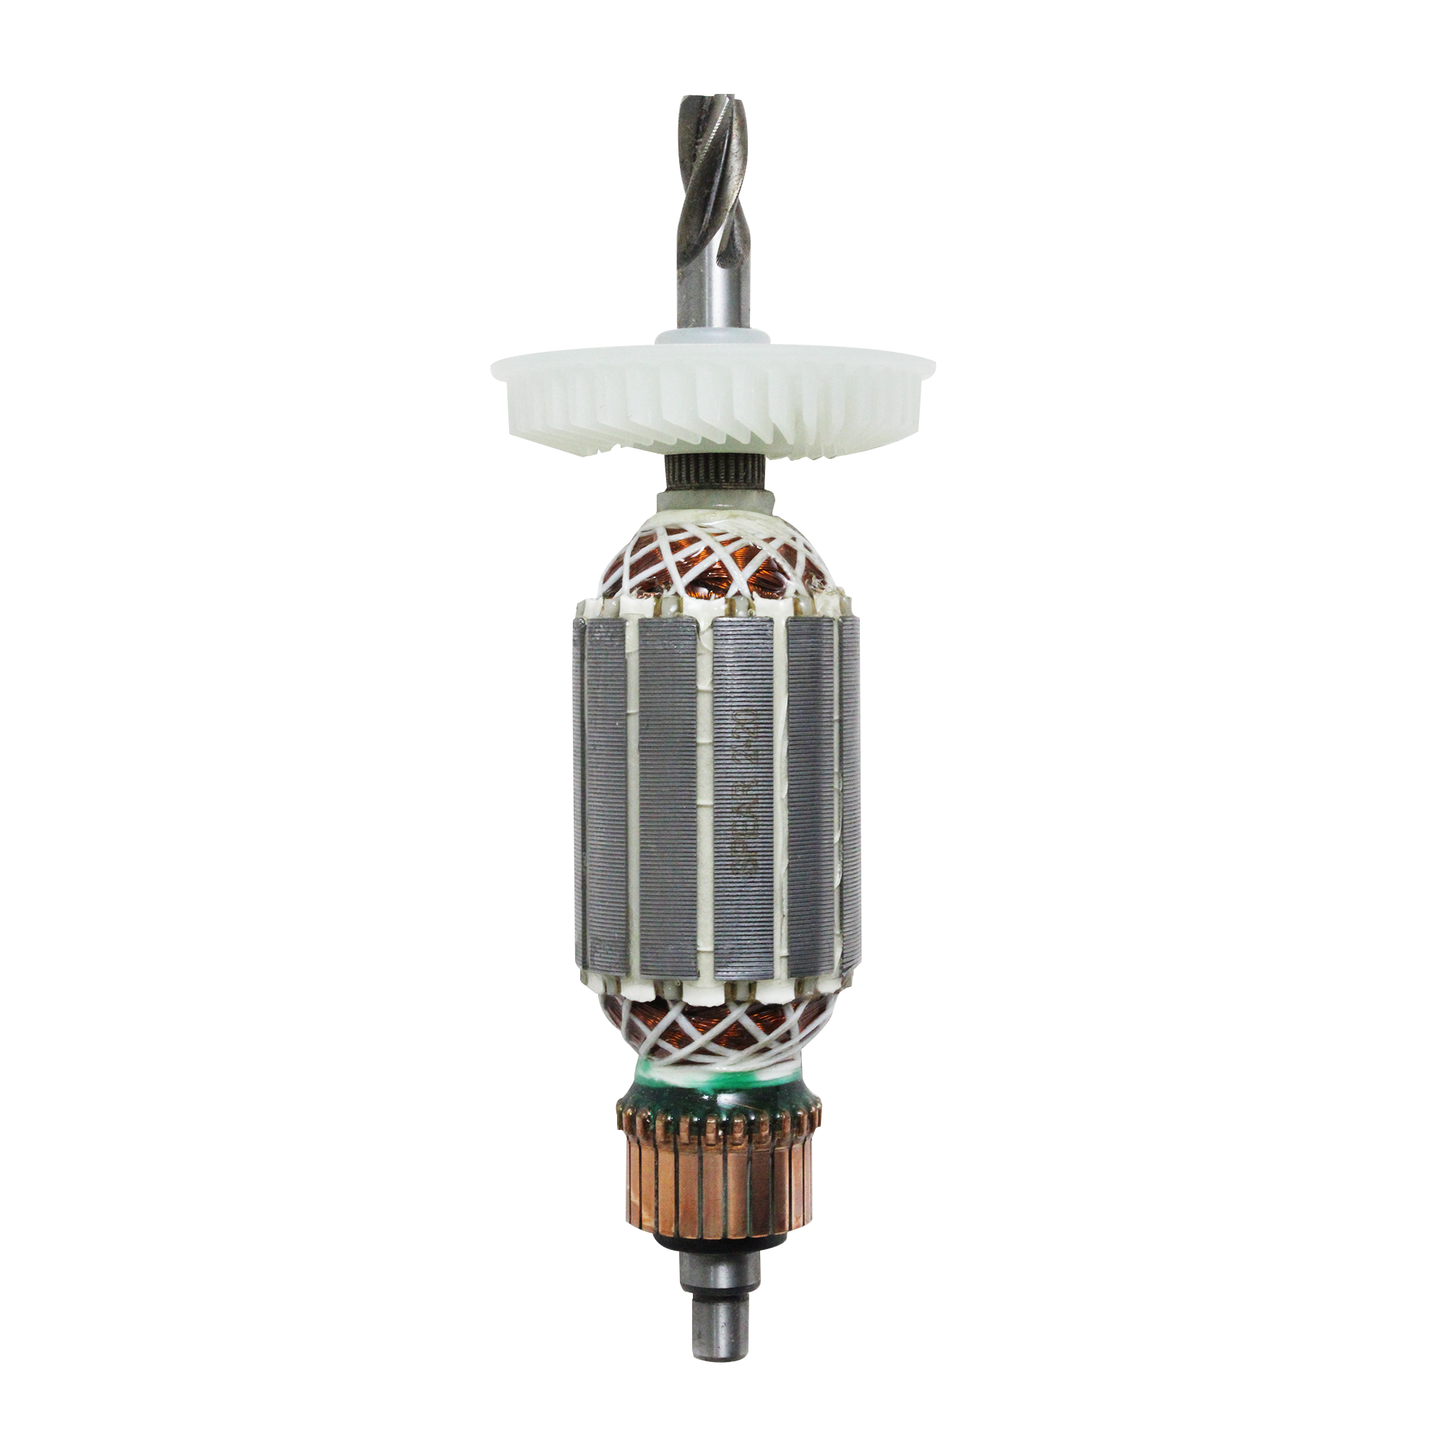 AEGON ACWF2-20 Copper Armature - Compatible with Aegon AHD201, Bosch GBH 2-20 & More